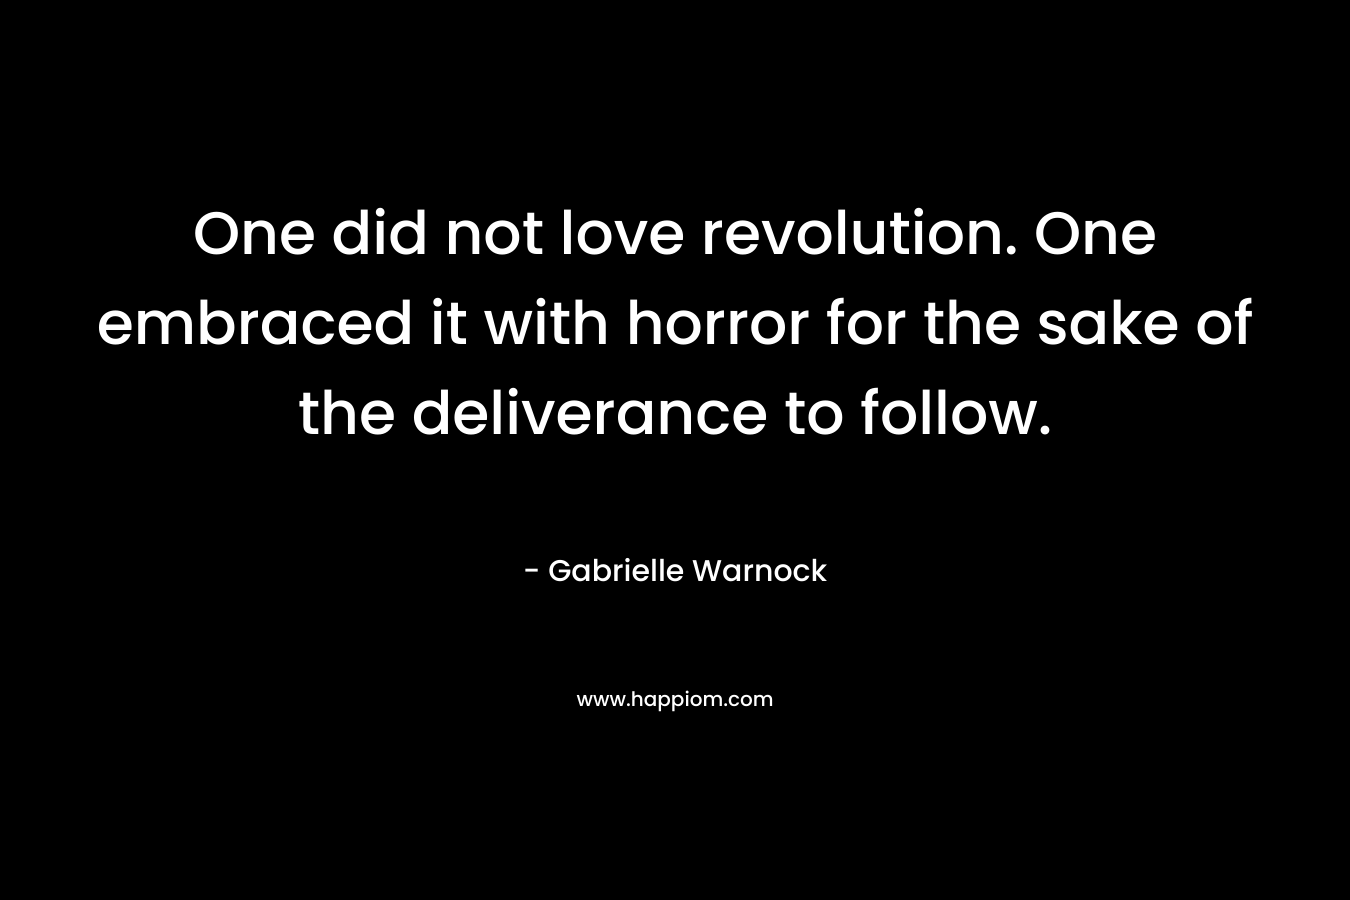 One did not love revolution. One embraced it with horror for the sake of the deliverance to follow. – Gabrielle Warnock